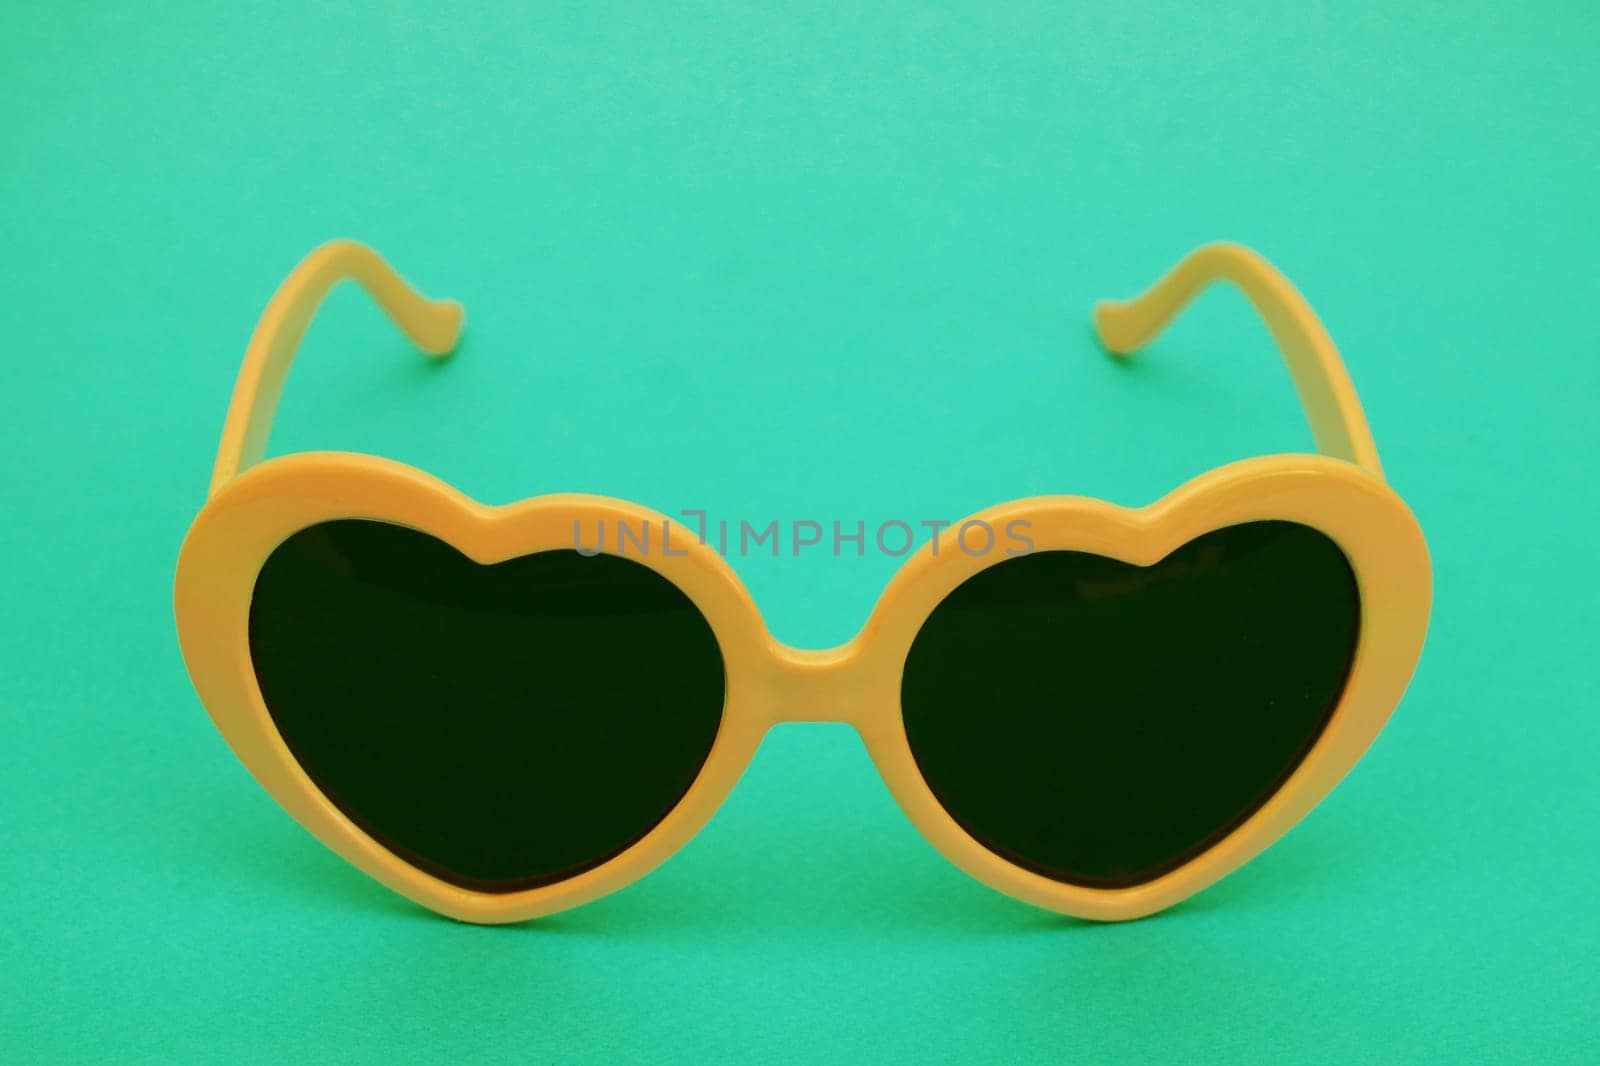 Dark opaque glasses with an orange plastic frame on a green background.